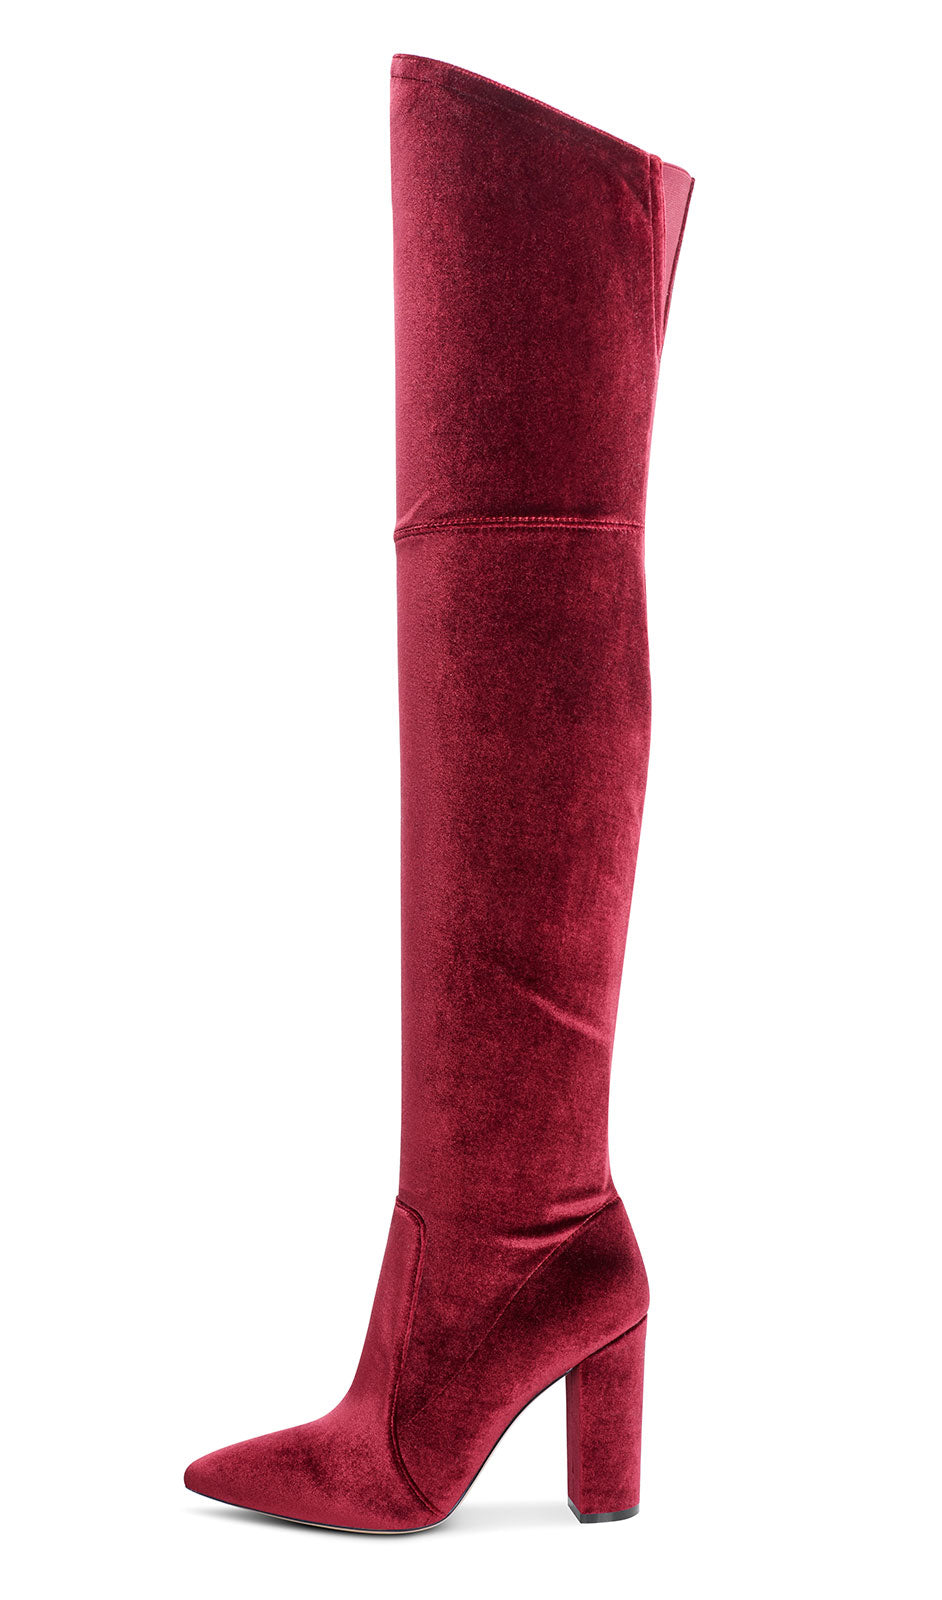 CASTAMERE Womens High Heels Over The Knee Boots Sexy Pointy Toe Chunky Block 10CM Heel Boot with Zipper